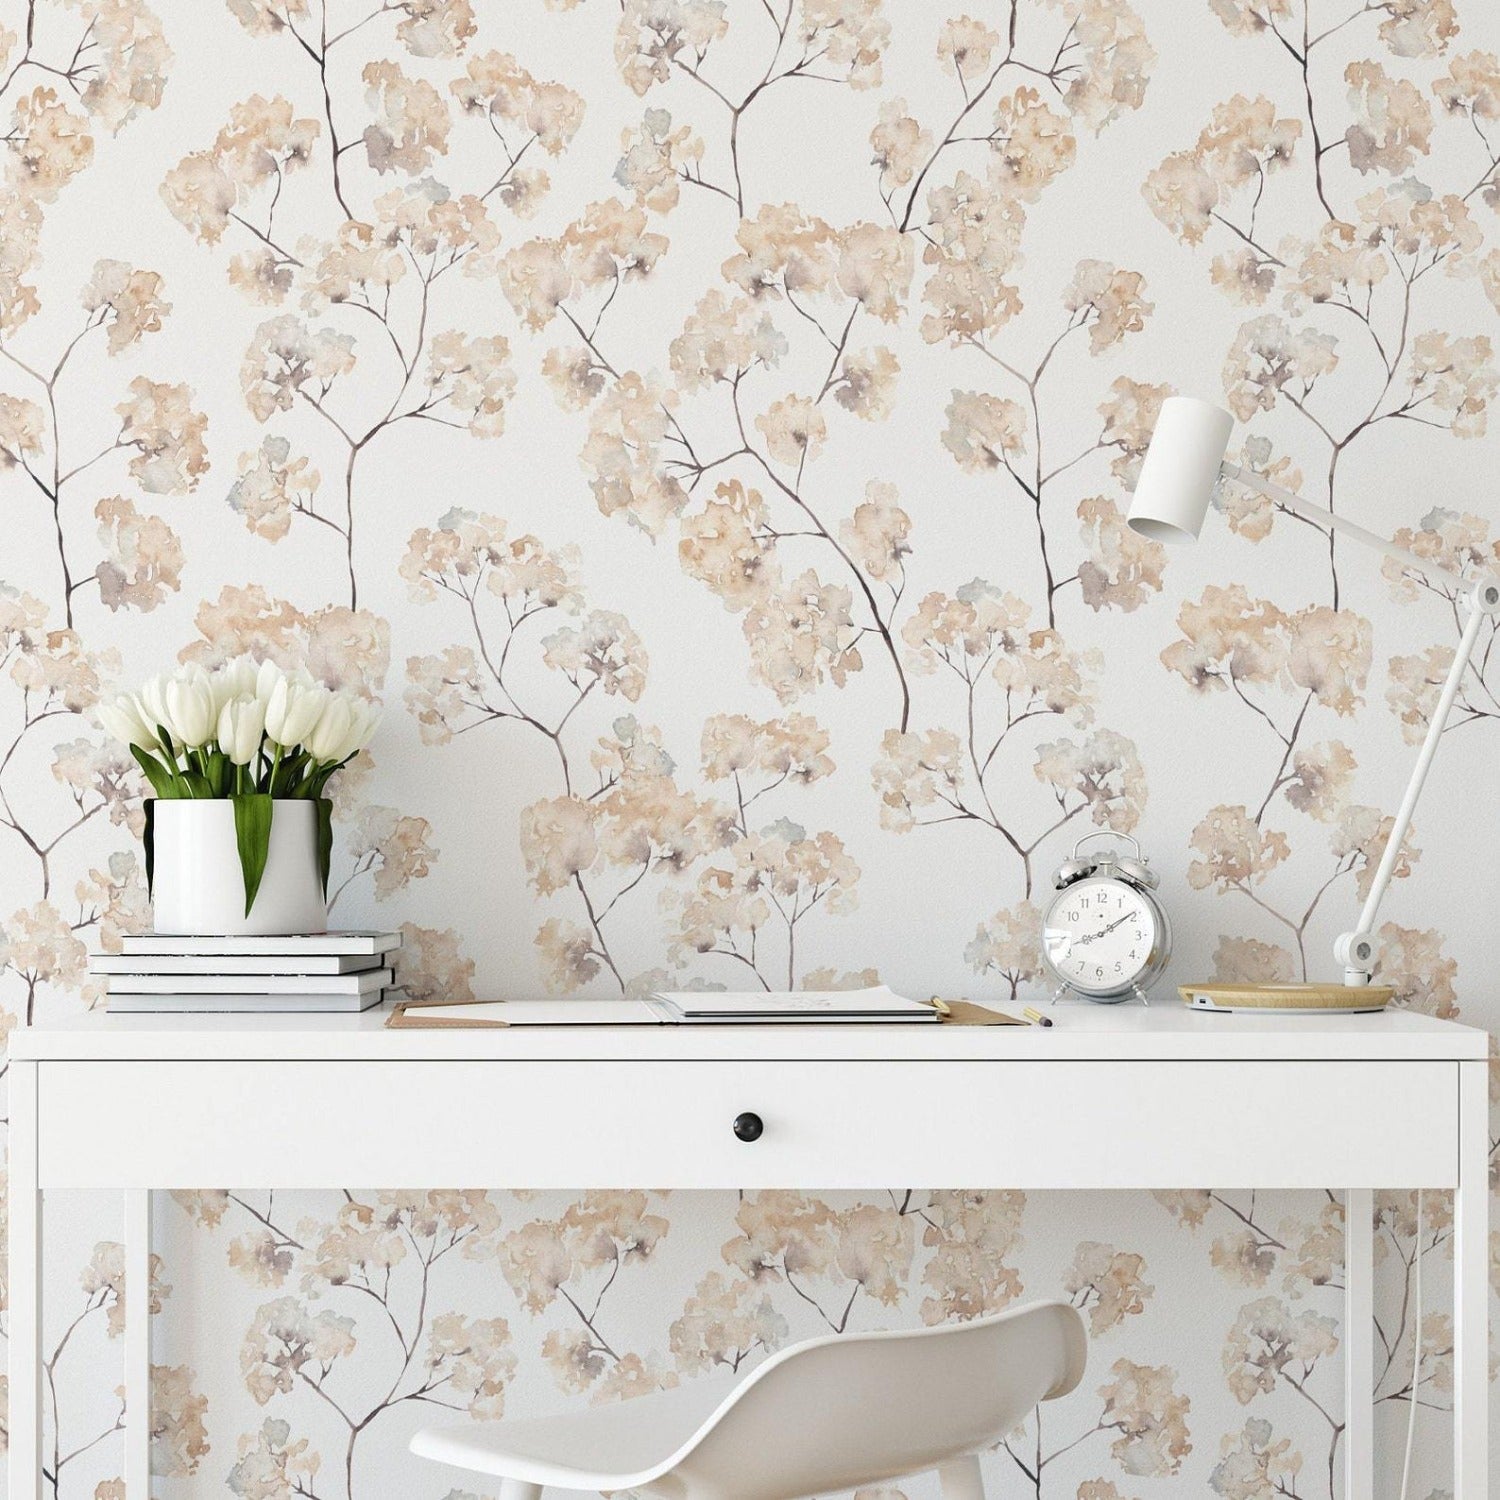 An elegant home office setup featuring 'Pastel and Cream Floral' wallpaper. The design has delicate floral patterns in pastel and cream shades on a light background, adding a soft, romantic touch to the decor. The room includes a sleek white desk, a modern chair, and tasteful desk accessories, enhancing the room's chic, inviting ambiance.